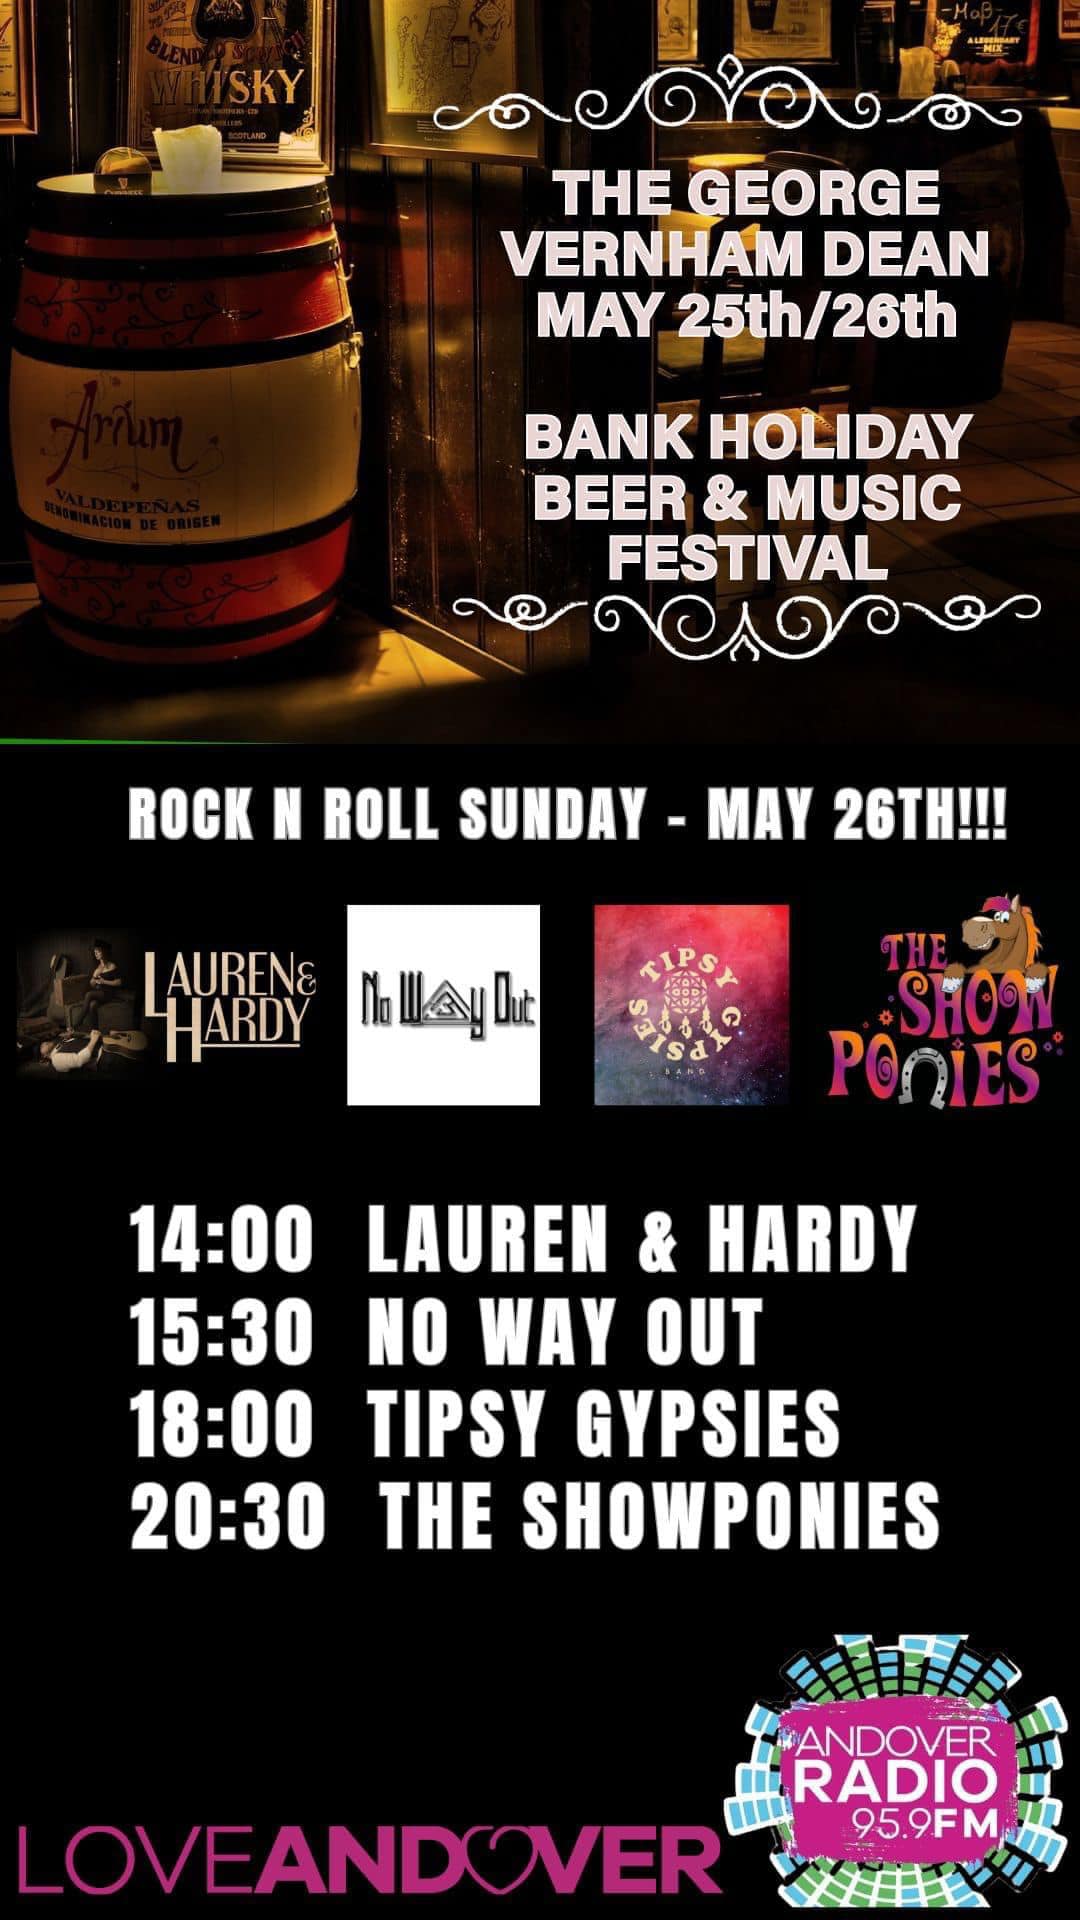 Bank Holiday Beer & Music Festival: Lauren & Hardy + No Way Out + Tipsy Gypsies + The Showponies